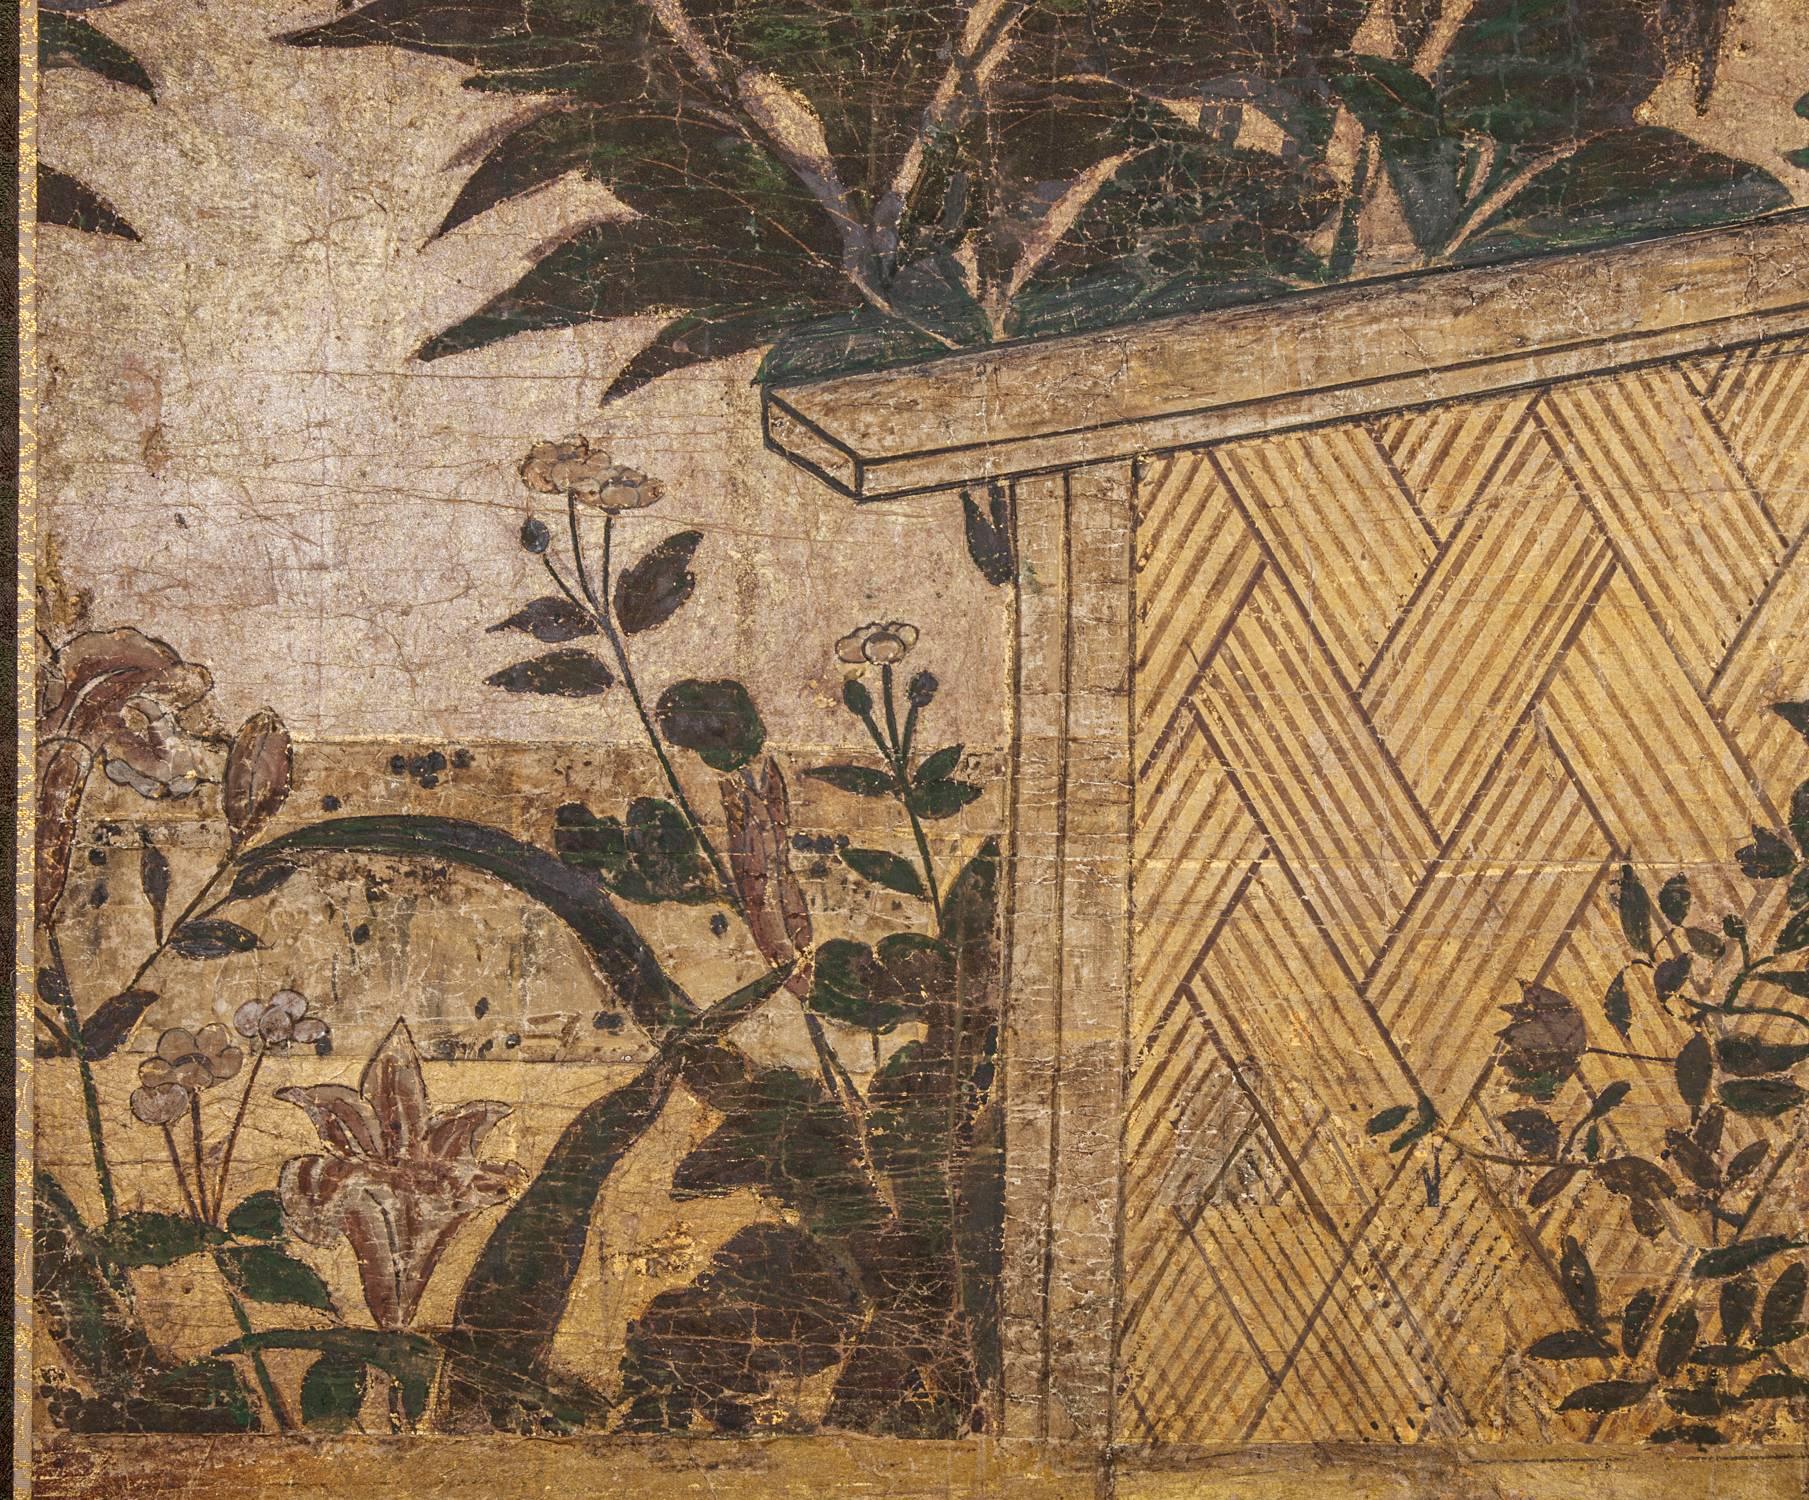 Edo period painting (c. 1700) showing flowers, including peonies, growing by a woven fence.  Mineral pigments on heavy gold leaf.